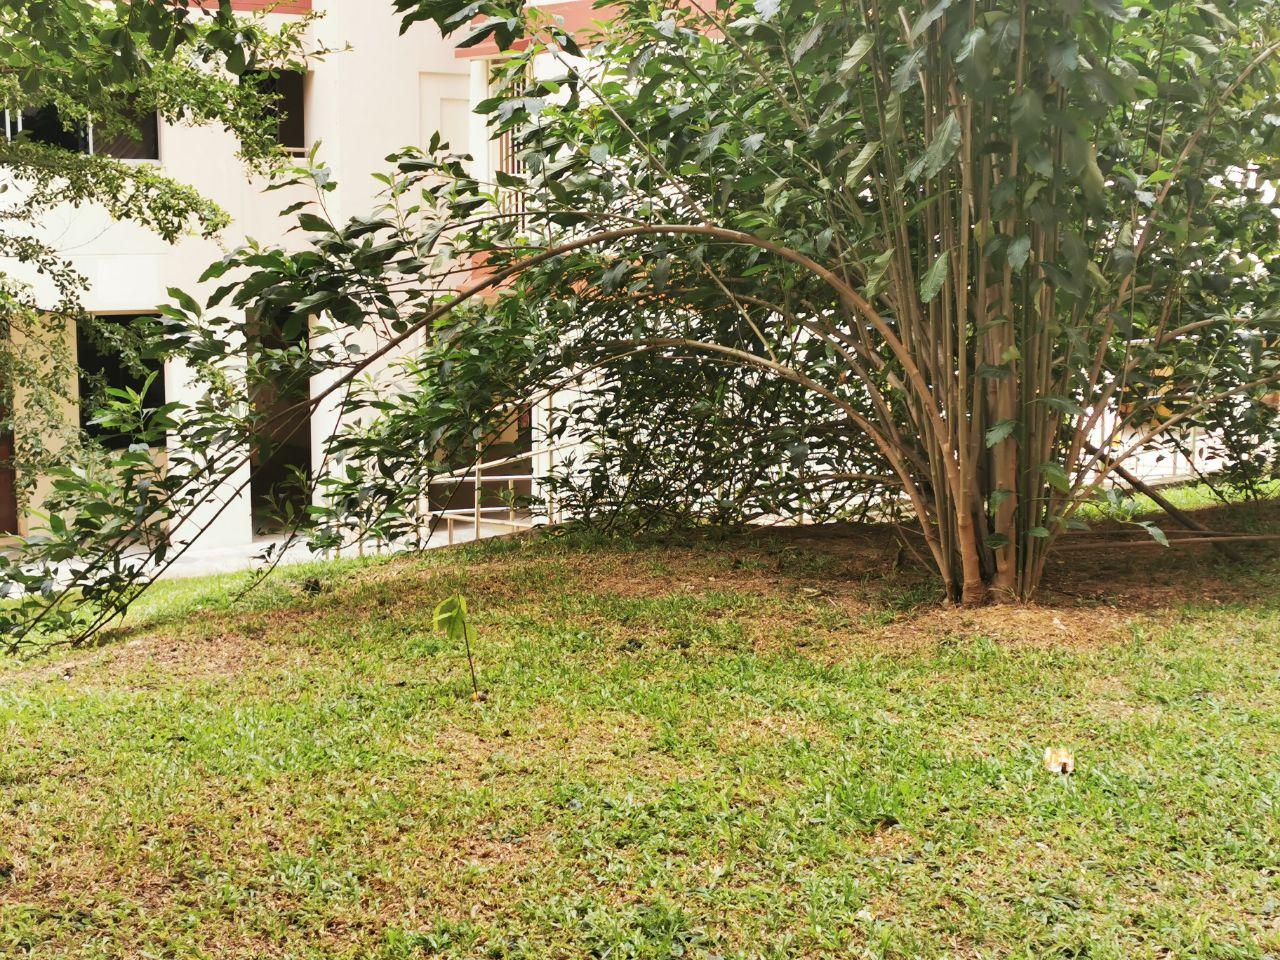 An arched branch in Sin Ming Court estate